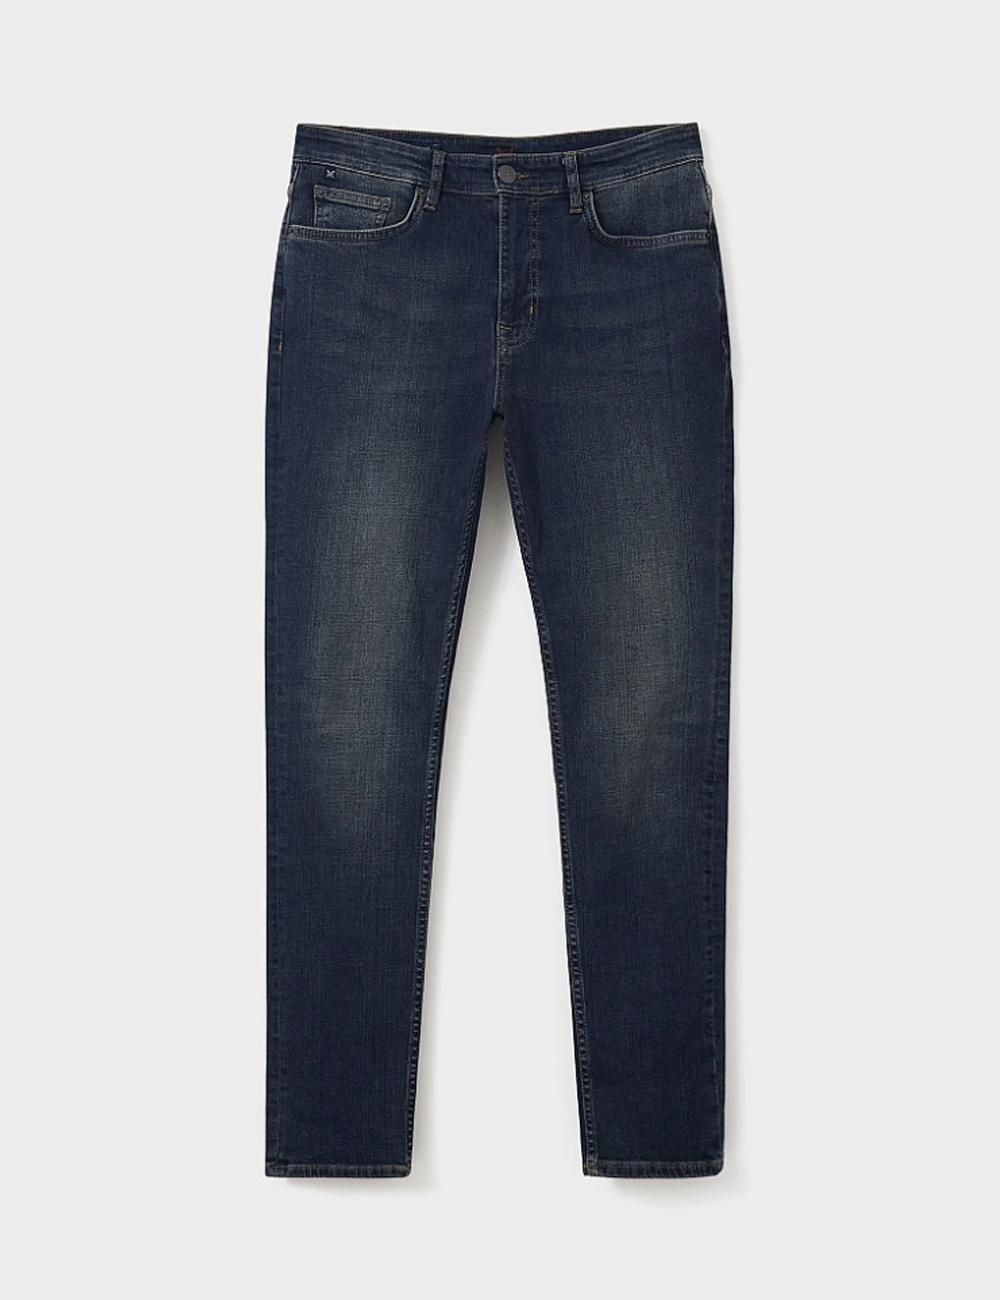 Crew Clothing's Spencer Jeans in Dark Vintage on a grey background